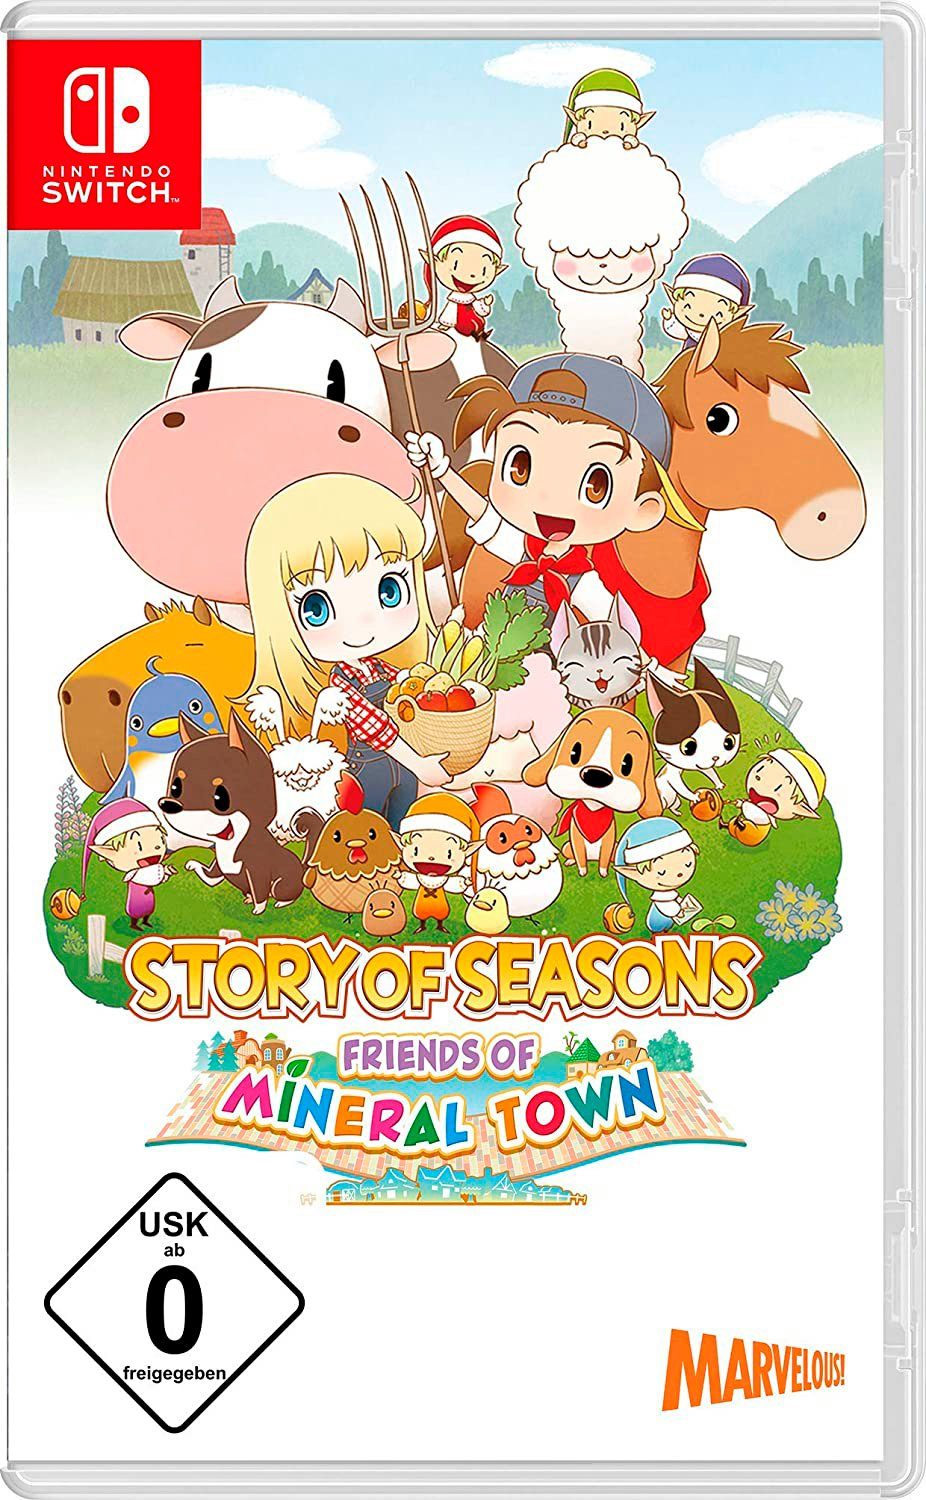 Seasons: Town Of Mineral Switch Friends Of Nintendo Story